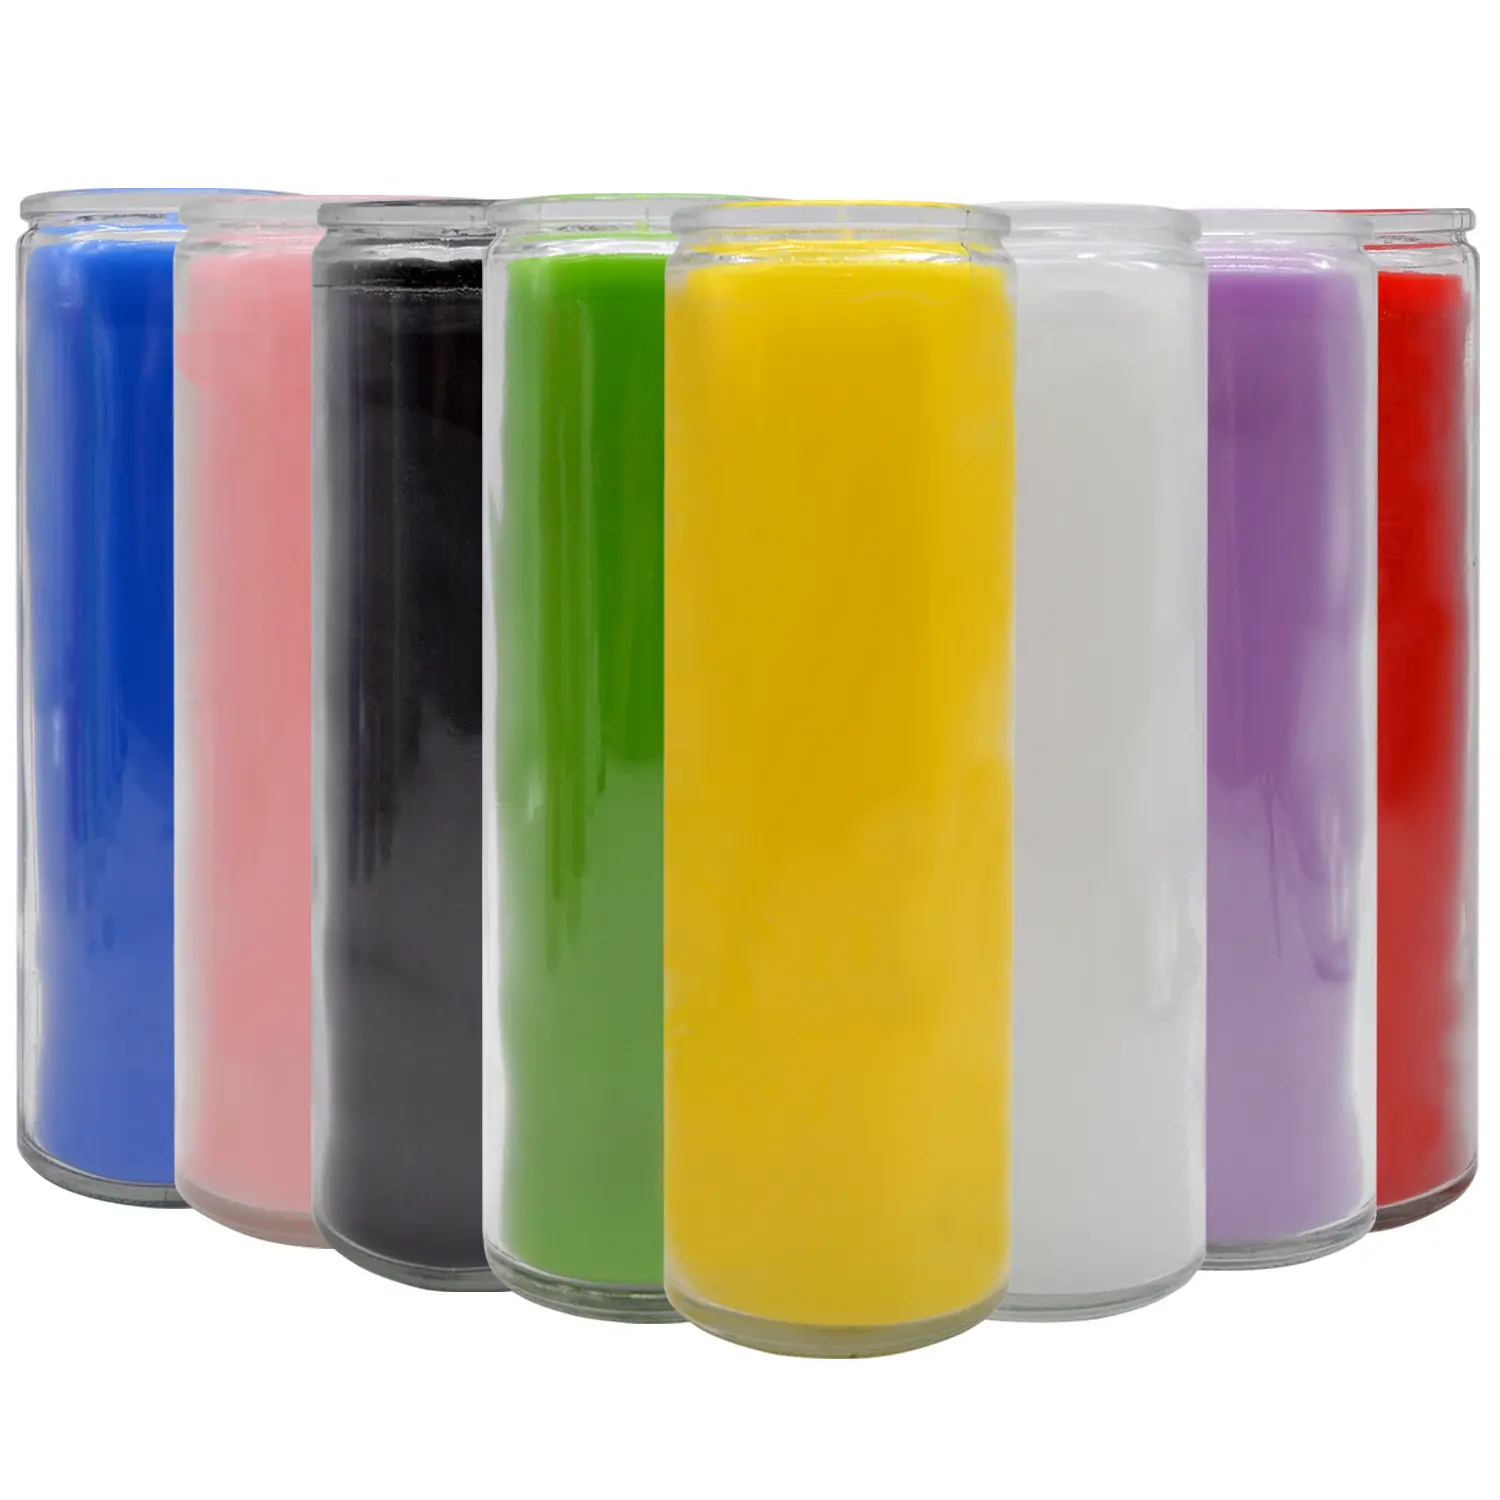 wholesale 7 days glass candles spiritual candles church religious glass jar candles